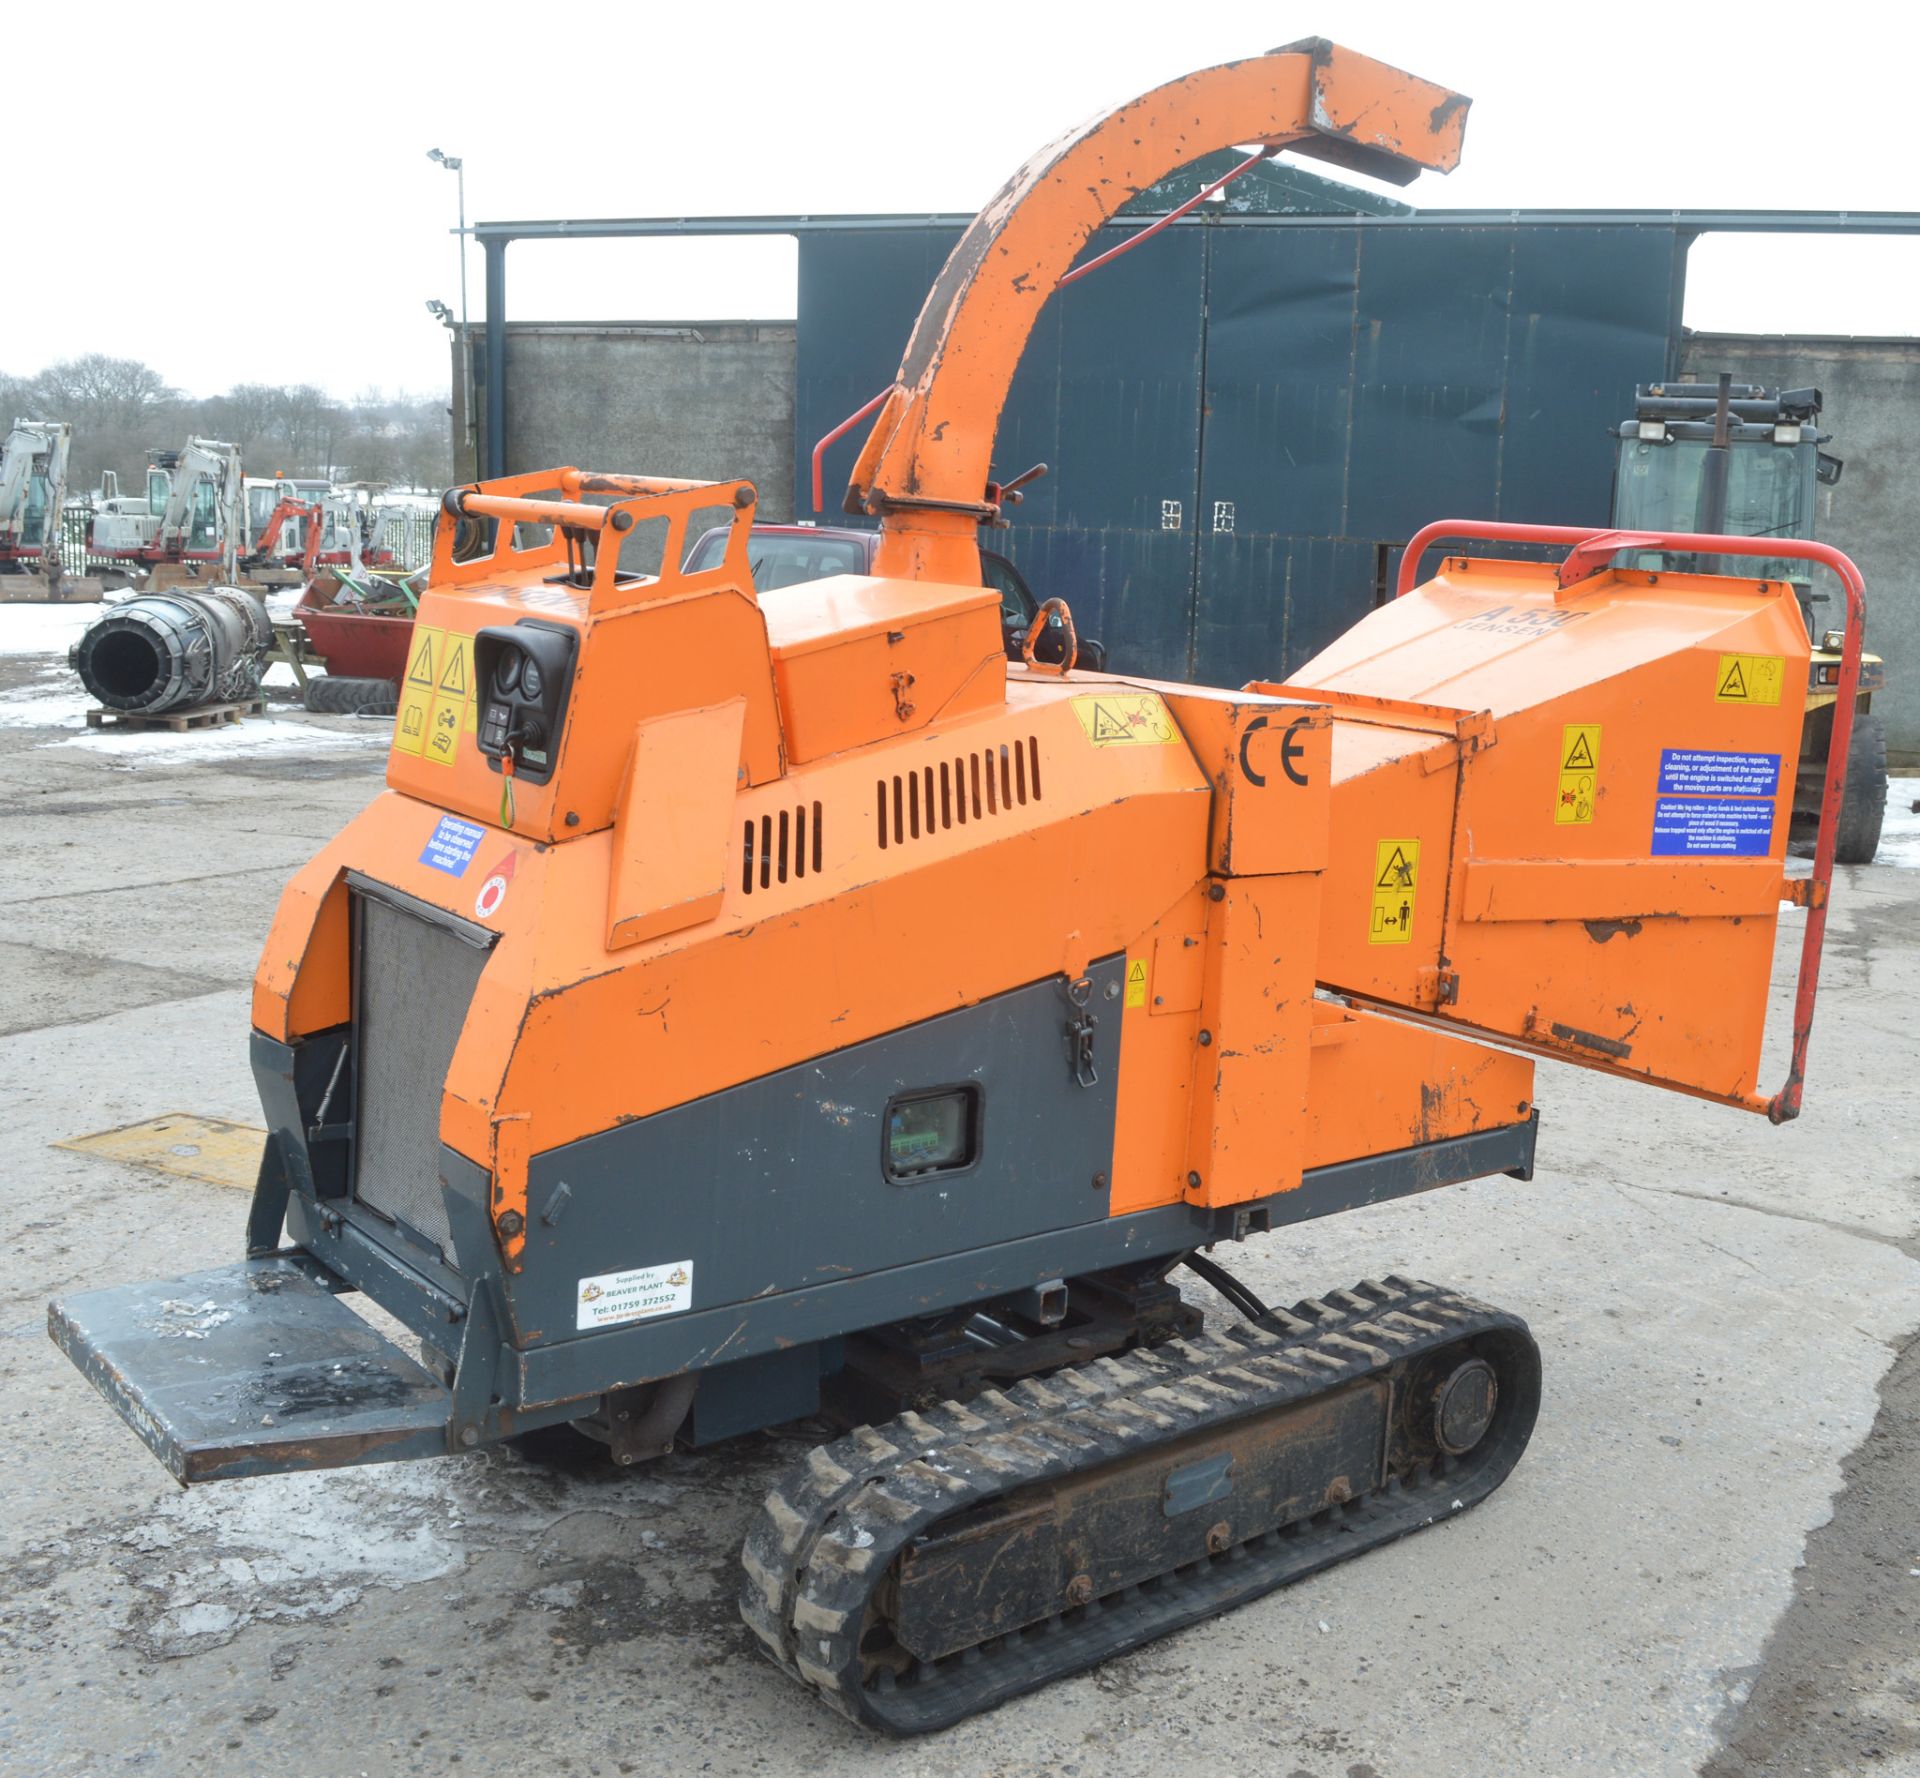 Jensen A530 rubber tracked mobile wood chipper  Year: 2007  S/N: 5507042220 Recorded hours: 1421 - Image 6 of 10